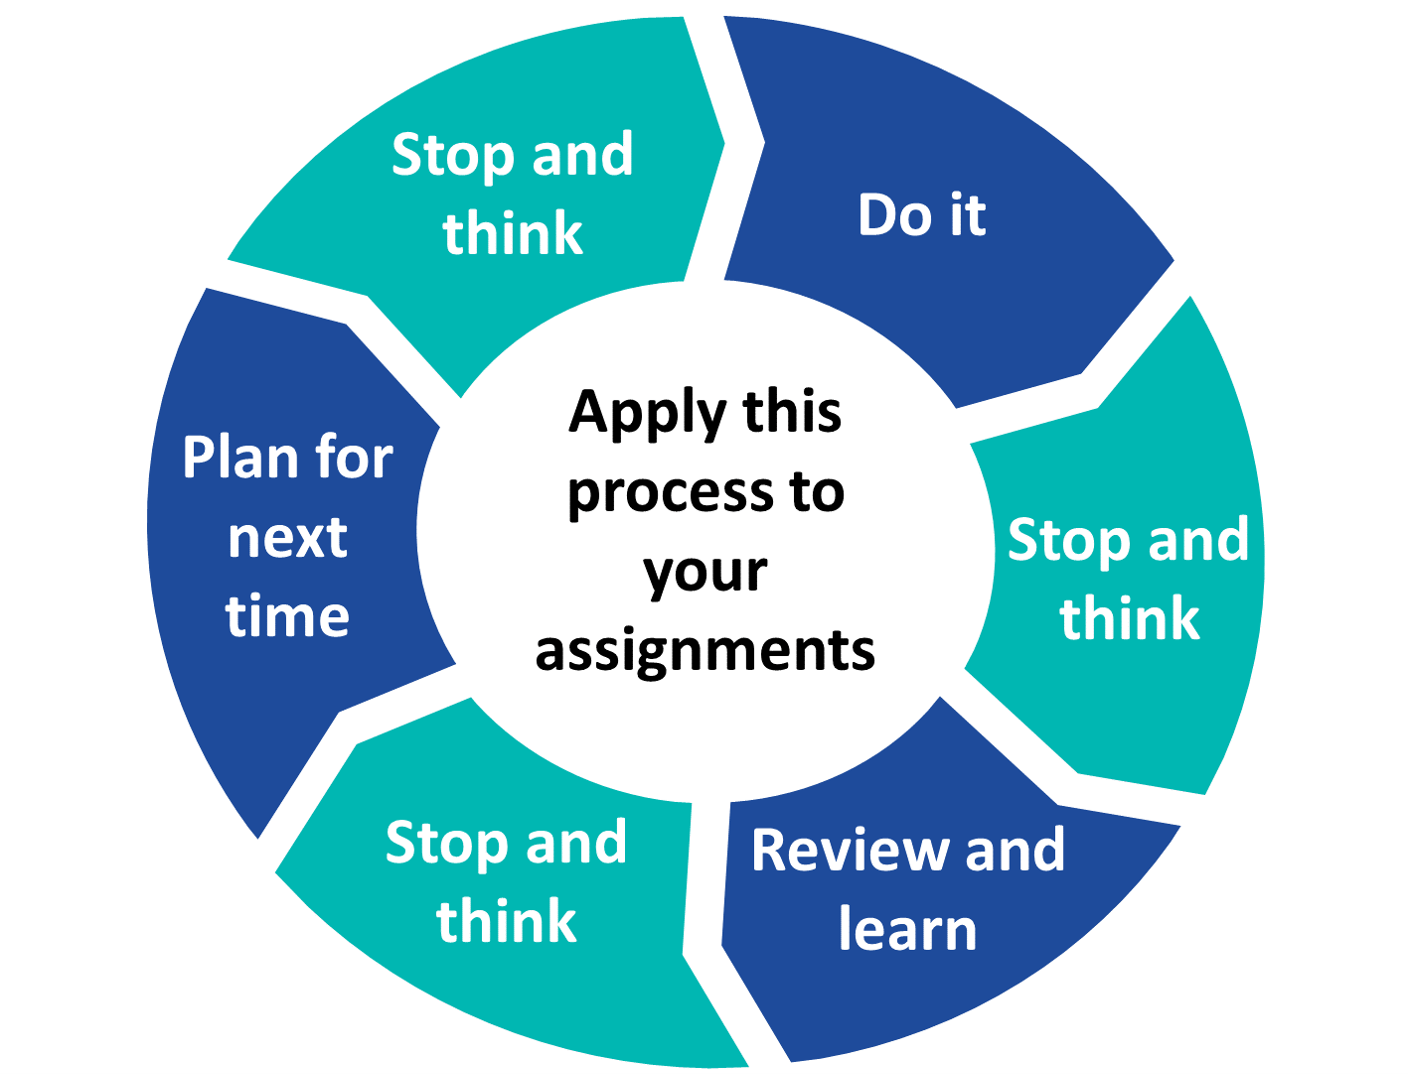 The example of the learning cycle shown as a circle.